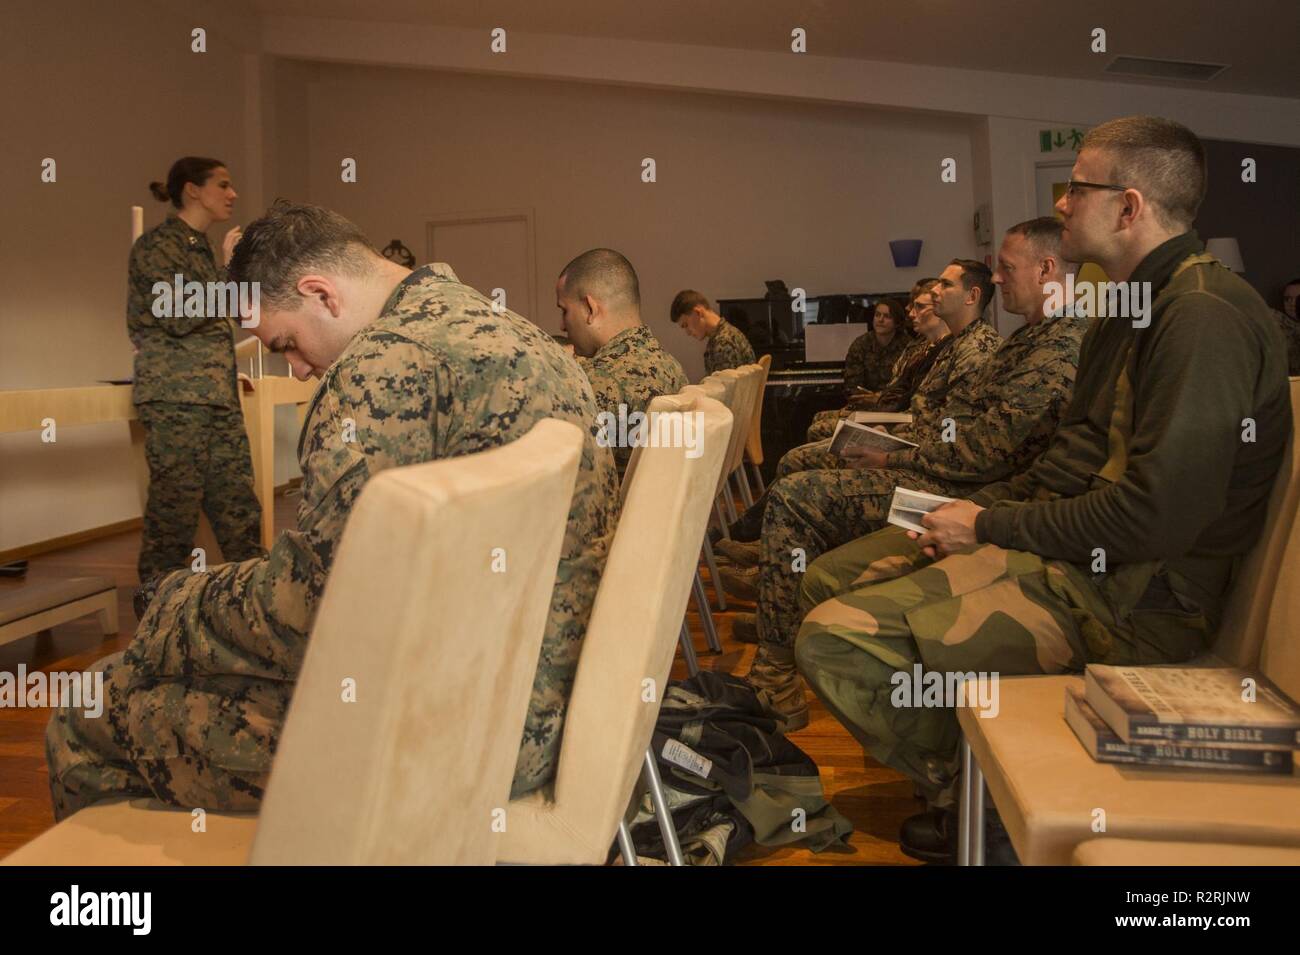 U.S. Marines, Sailors, and Norwegian soldiers take part in religious services during Exercise Trident Juncture 18 at Vaernes Air Station, Norway, Nov. 4, 2018. Trident Juncture 18 enhances the U.S. and NATO Allies’ and partners’ abilities to work together collectively to conduct military operations under challenging conditions. Stock Photo